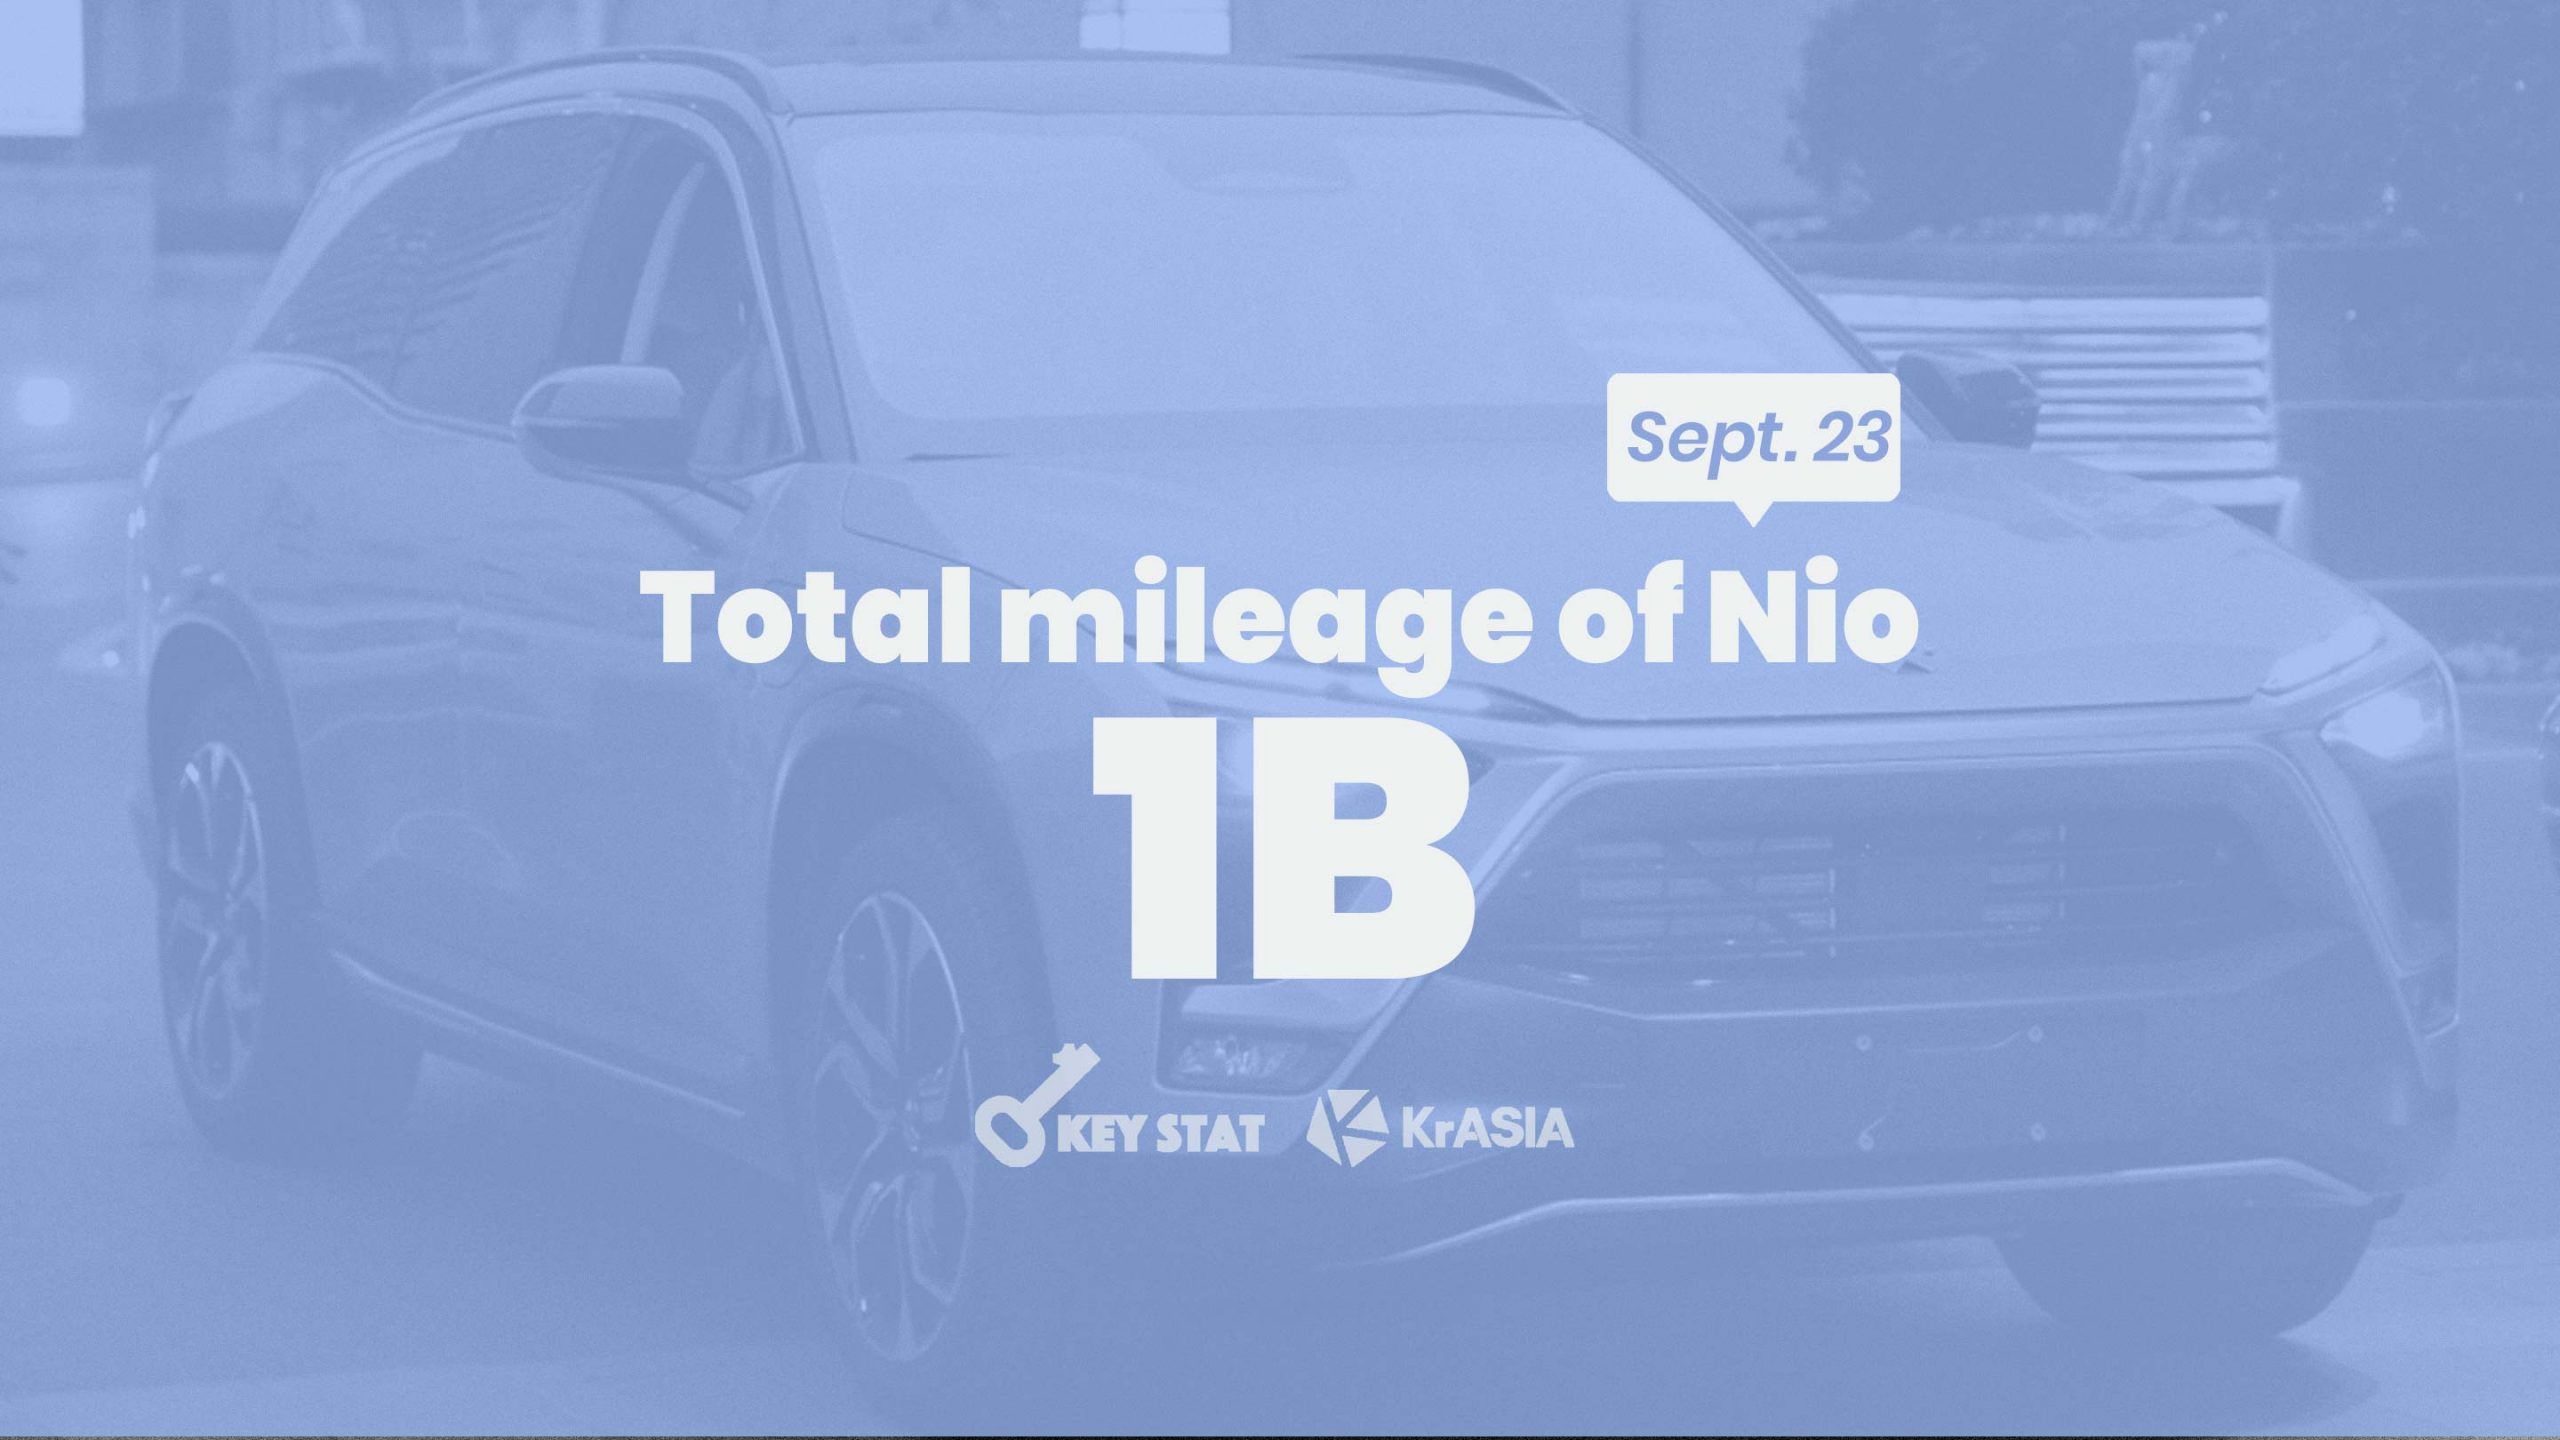 KEY STAT | “Tesla challenger” Nio logged a total of over 621 million miles